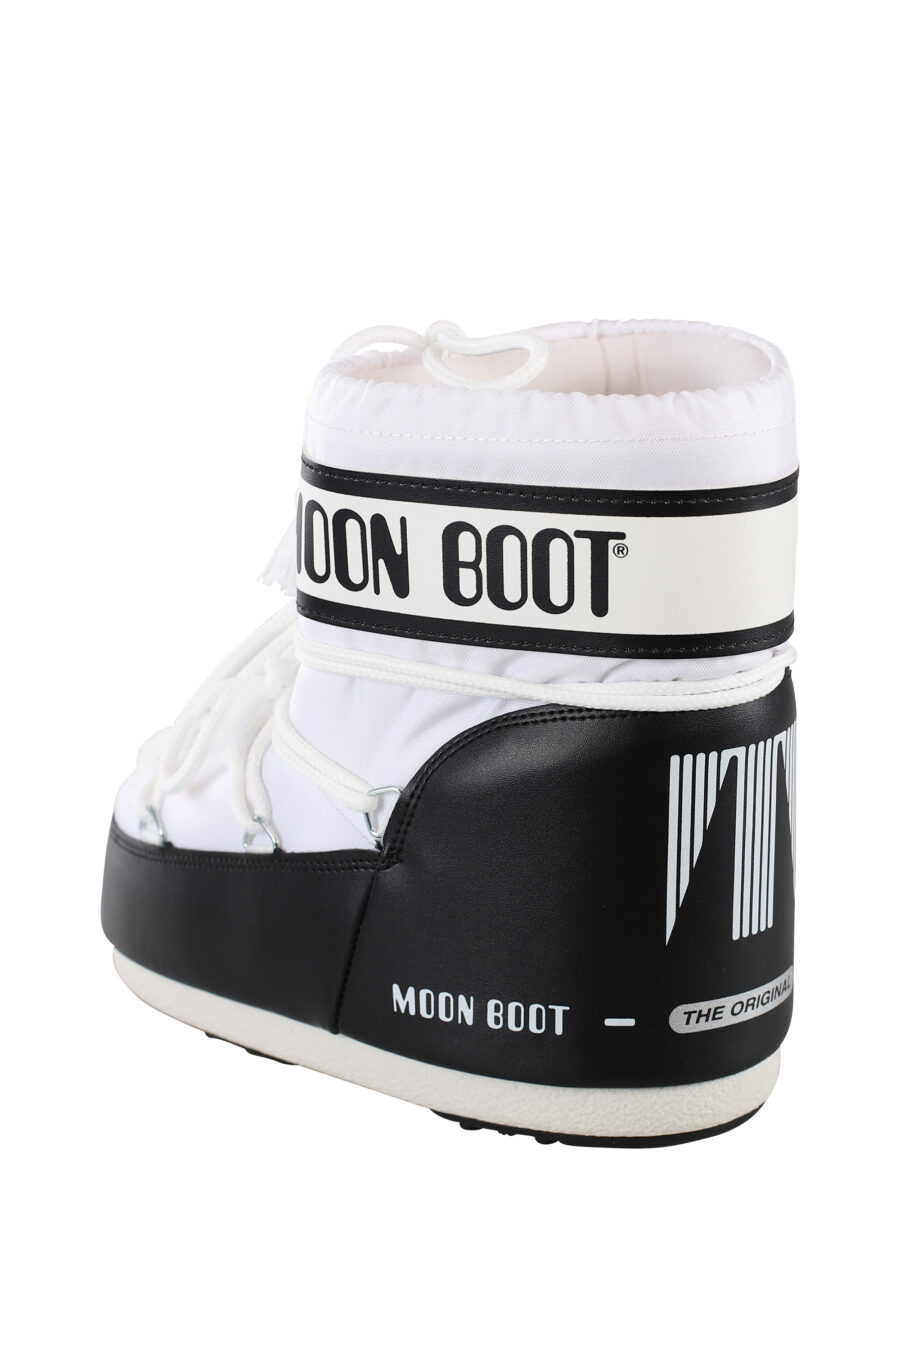 Two-tone black and white snow boots with black logo - IMG 6742